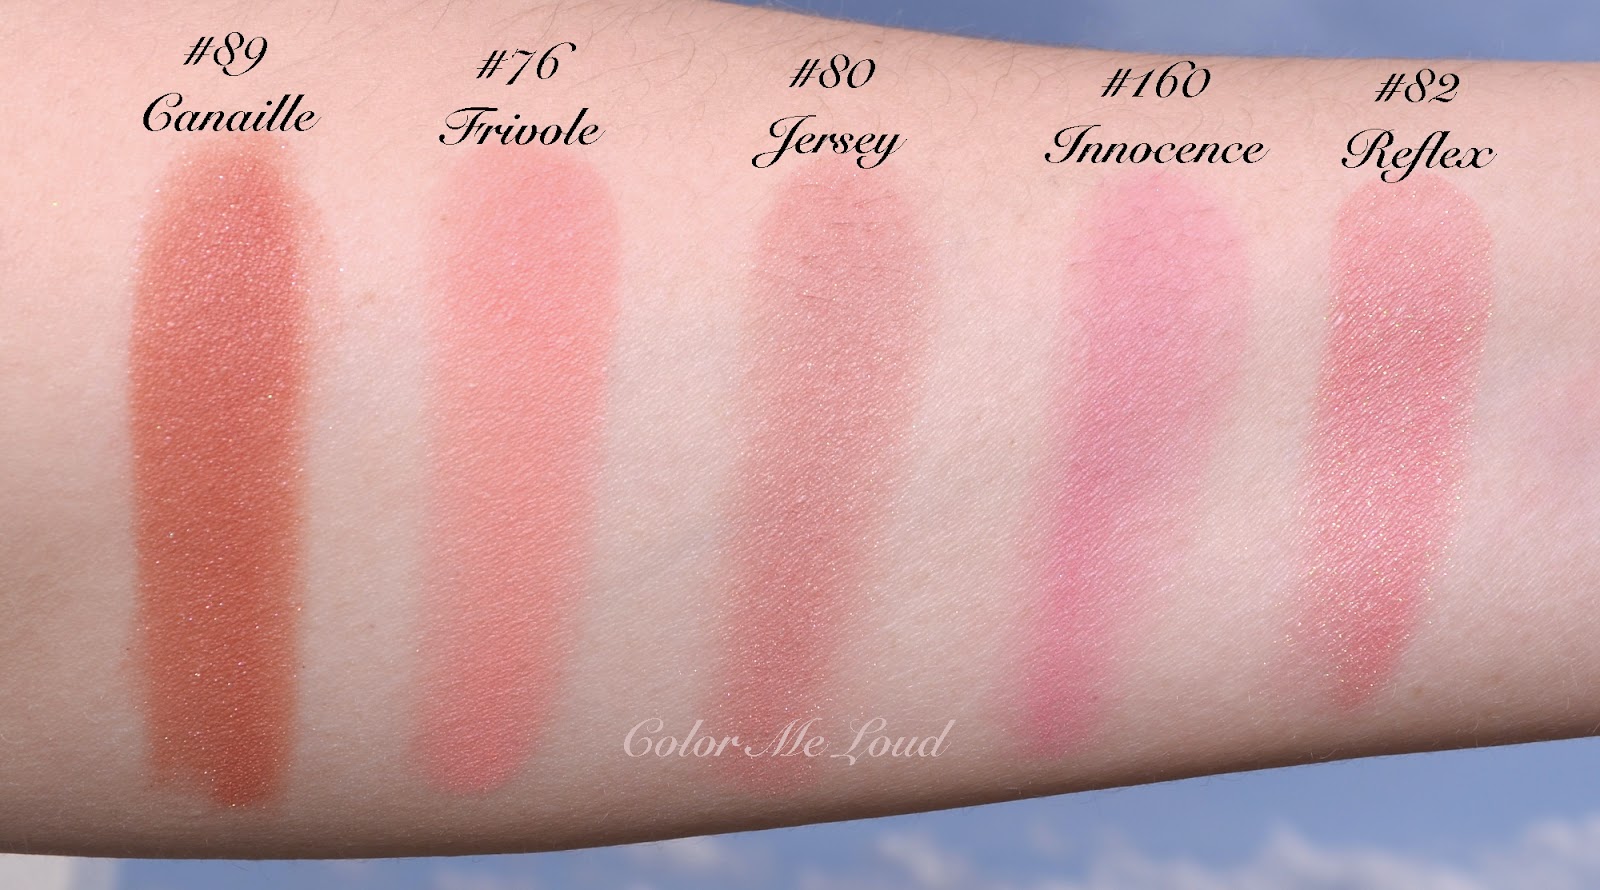 Chanel JOUES CONTRASTE Powder Blush Swatch and Review